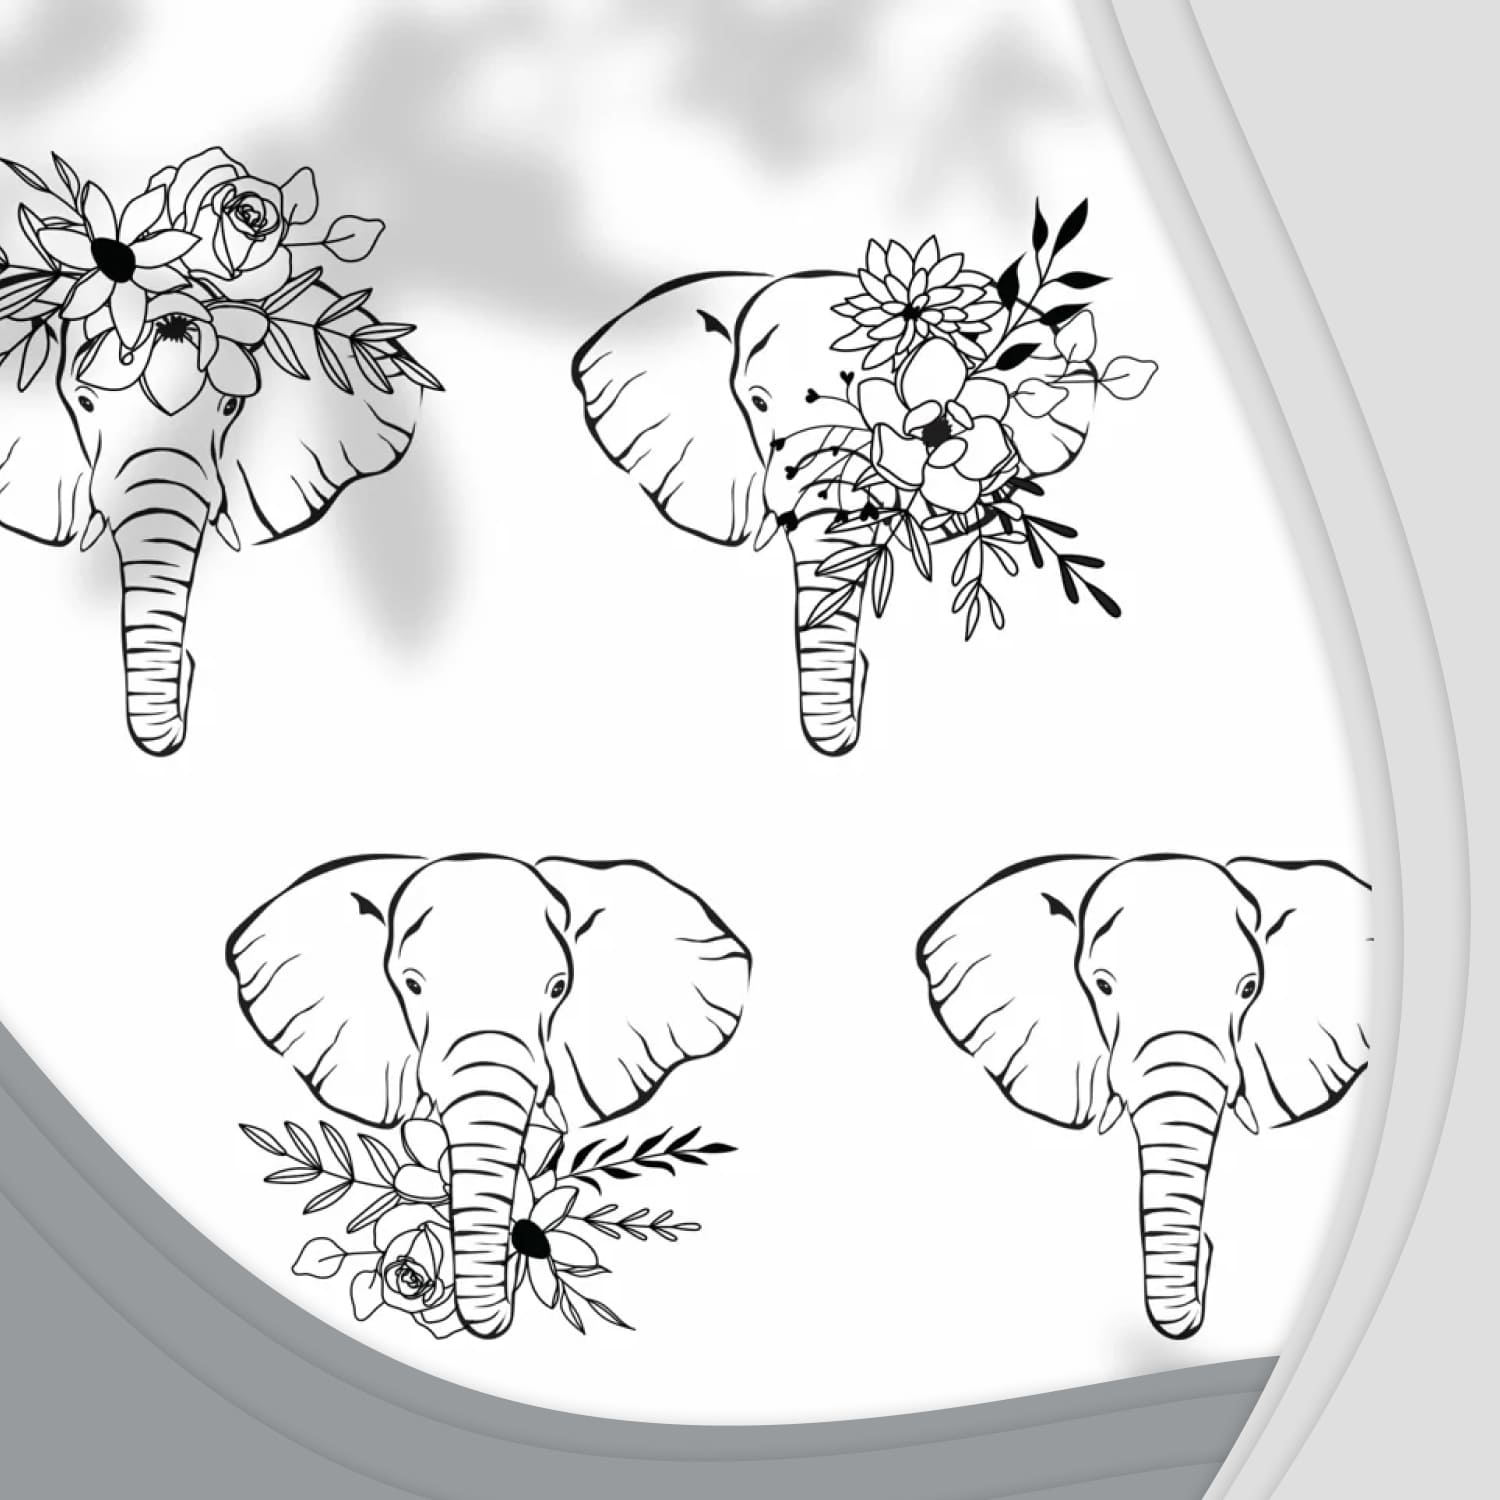 Drawing of elephants with flowers on their heads.